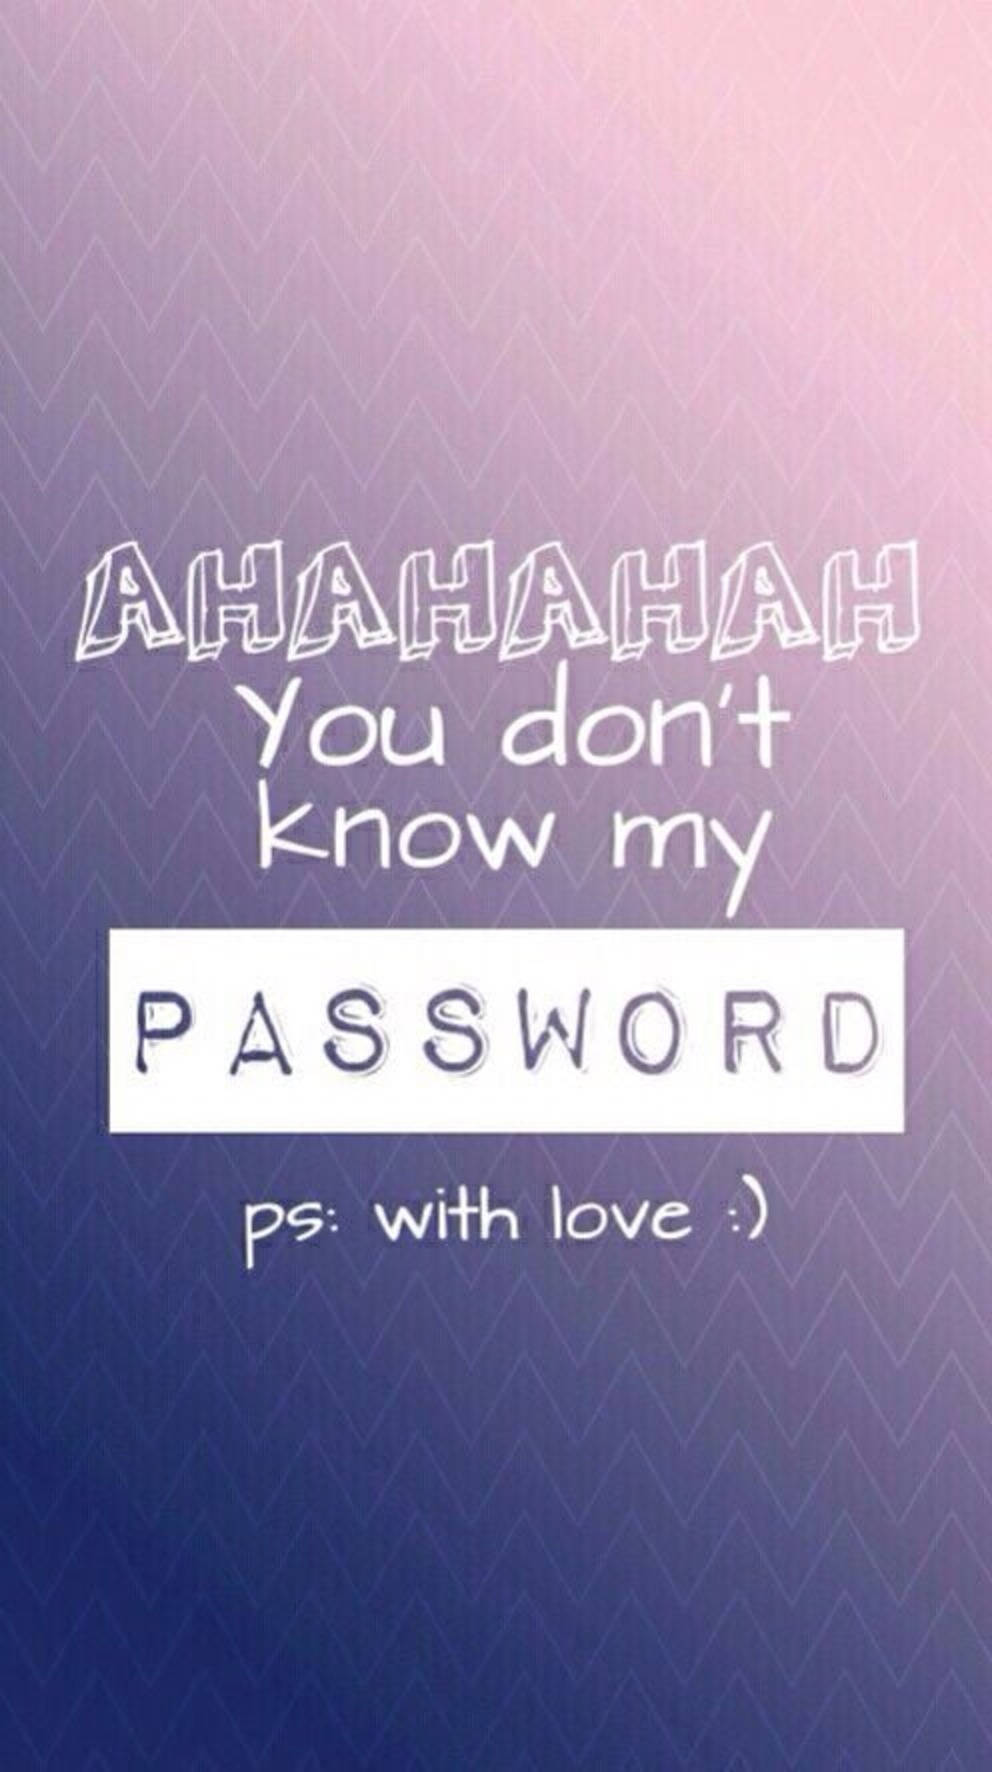 Free Hahaha You Dont Know My Password Wallpaper Downloads, [100+] Hahaha  You Dont Know My Password Wallpapers for FREE 